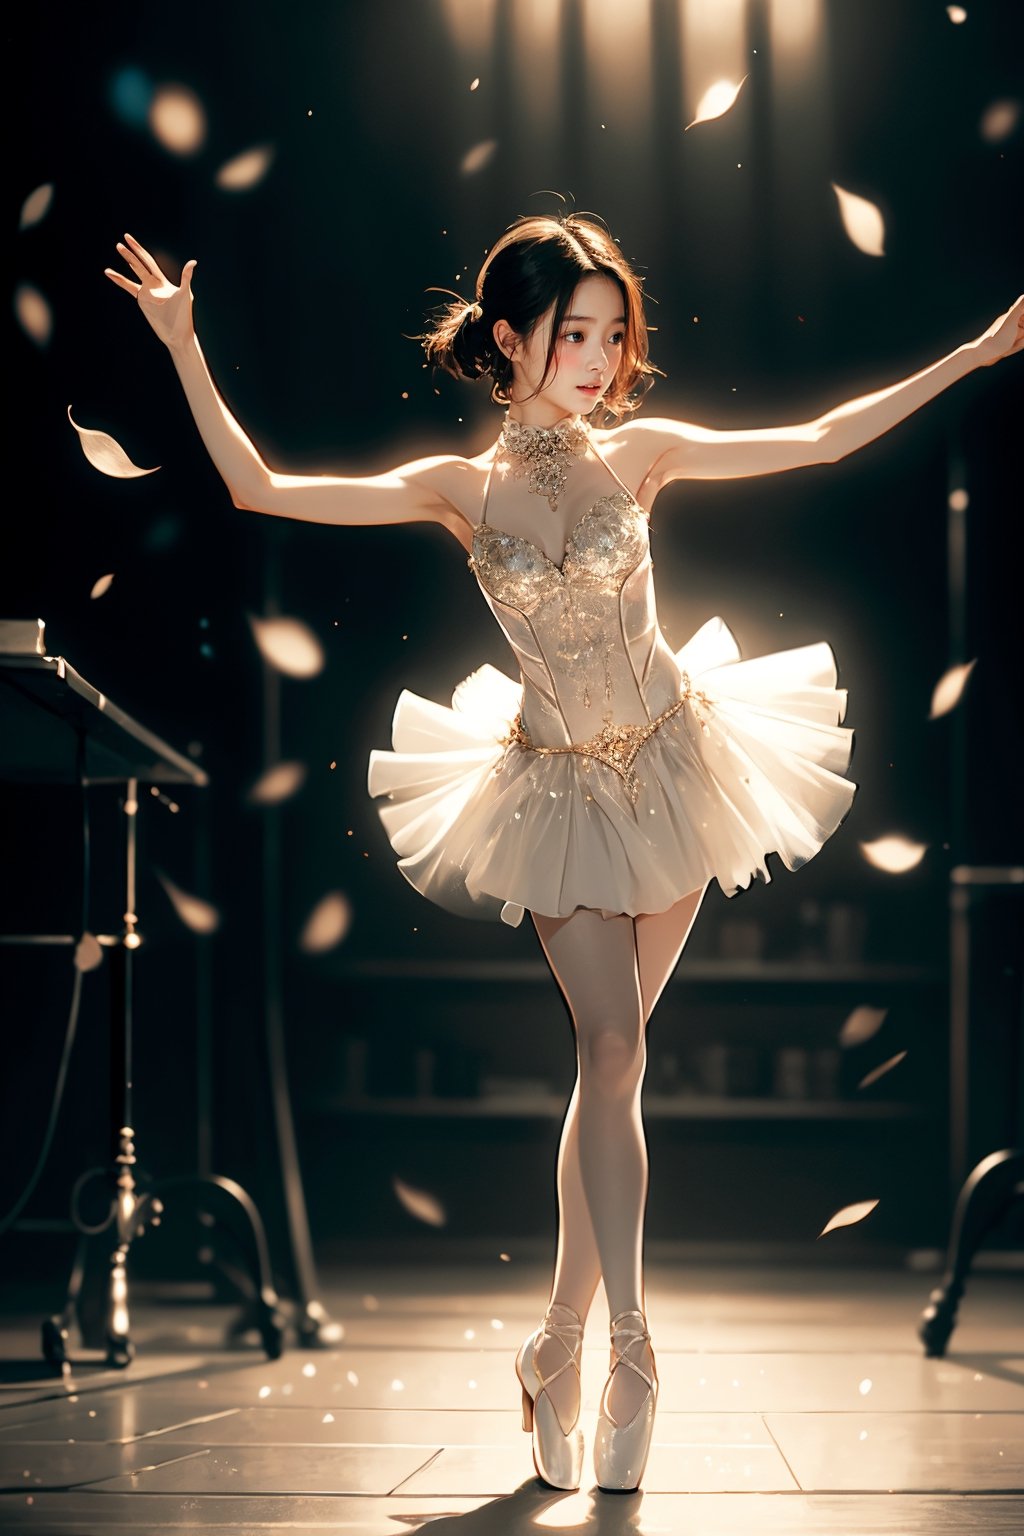 solo, An 18-year-old Korean girl wearing ballet costume (full body) dances alone in a dimly lit studio, her movements reflected in the soft spotlight. This scene highlights her dedication and artistic loneliness, echoing themes of personal growth in Iwai Shunji's work. The atmosphere of the scene is captured with a high graininess reminiscent of ISO 800 film. ,IU,1 girl